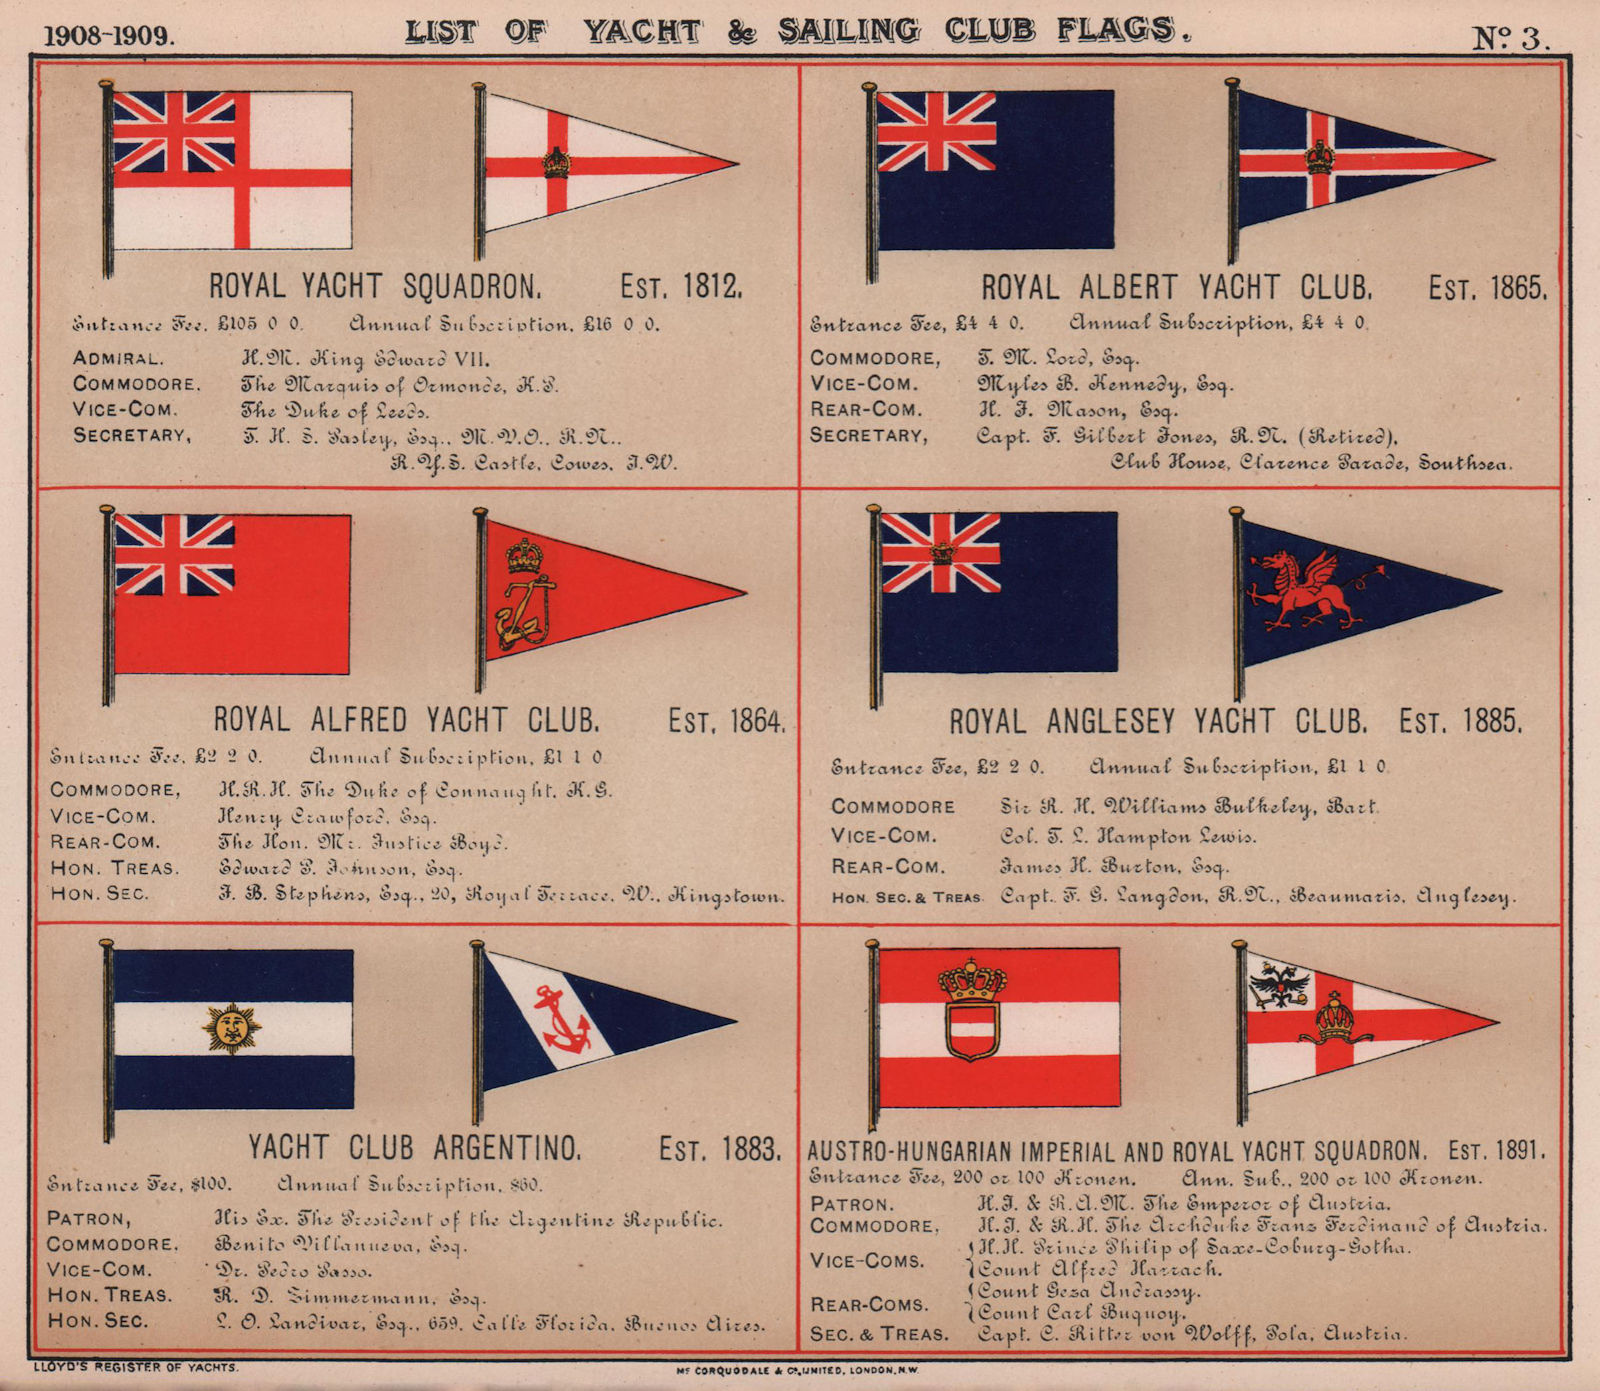 ROYAL YACHT & SAILING CLUB FLAGS A Squadron Albert Anglesey Argentino 1908